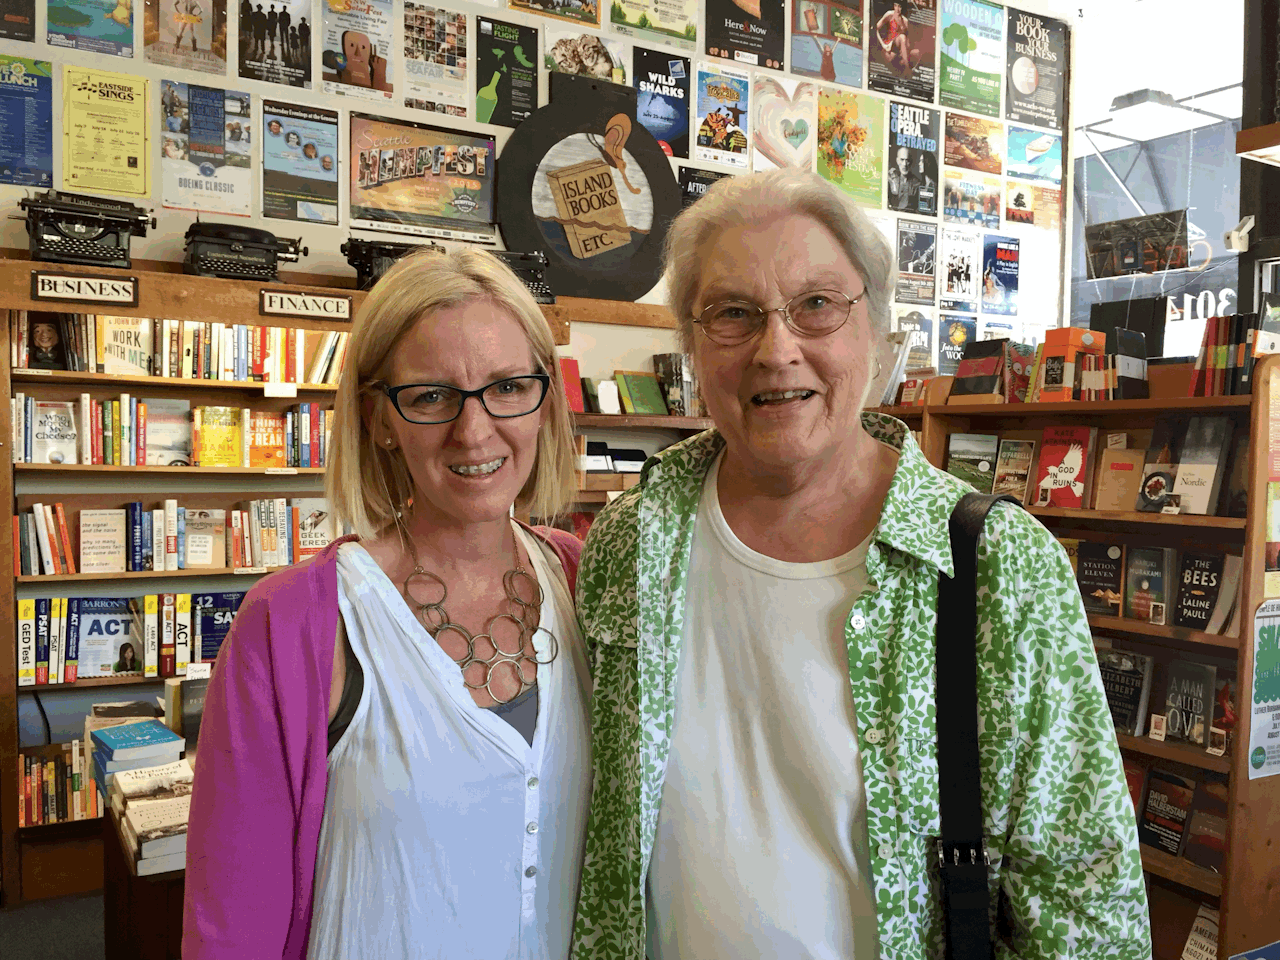 Lola Deane with Laurie Raisys at Island Books